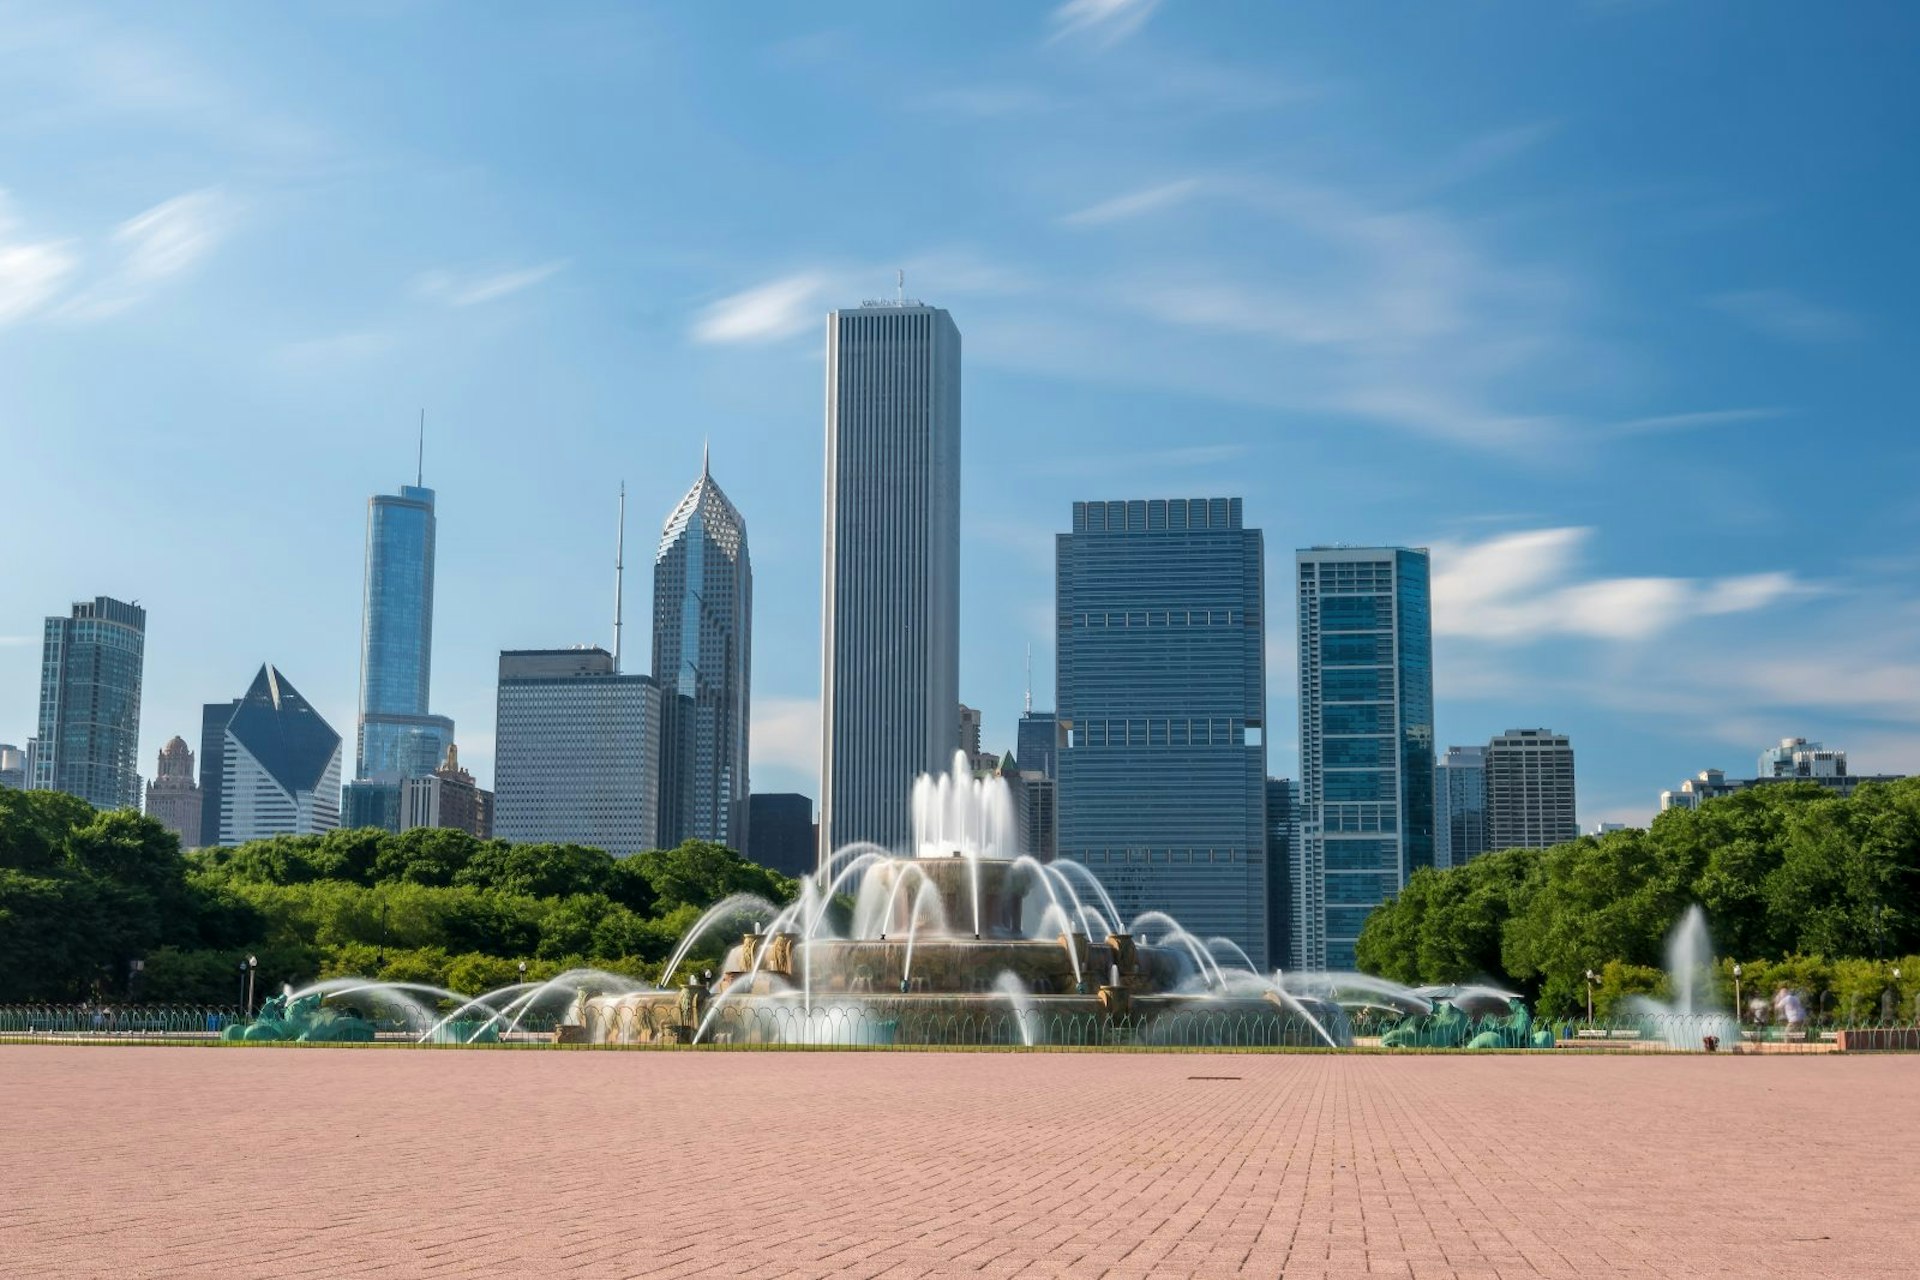 buckingham fountain in front of the city skyline in Grant Park, Chicago